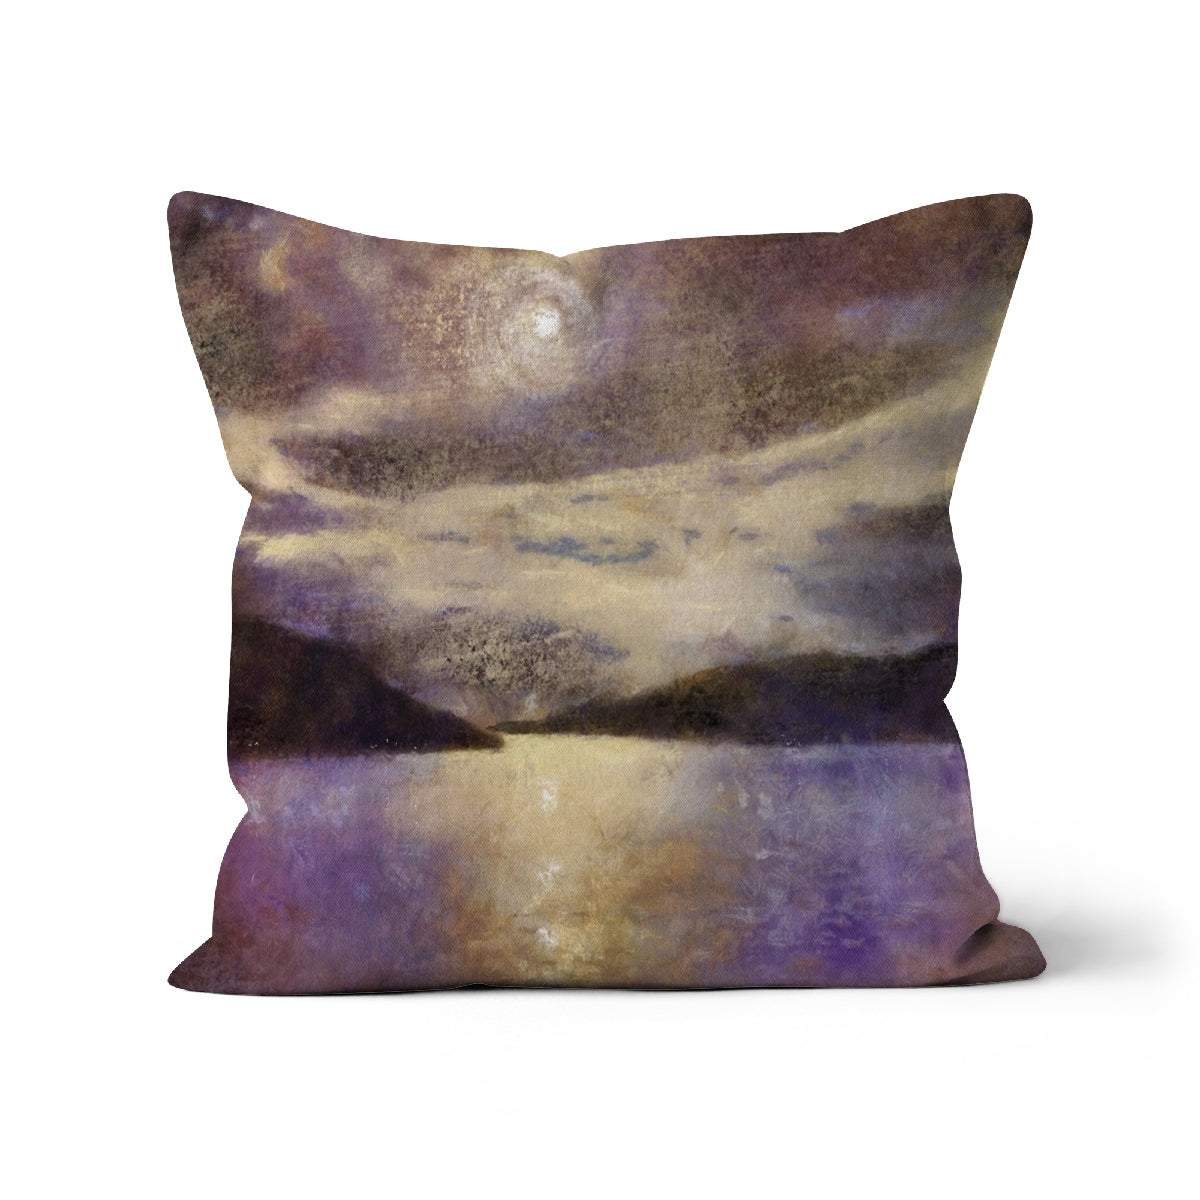 Moonlight Meets Lewis & Harris Art Gifts Cushion-Cushions-Hebridean Islands Art Gallery-Faux Suede-16"x16"-Paintings, Prints, Homeware, Art Gifts From Scotland By Scottish Artist Kevin Hunter